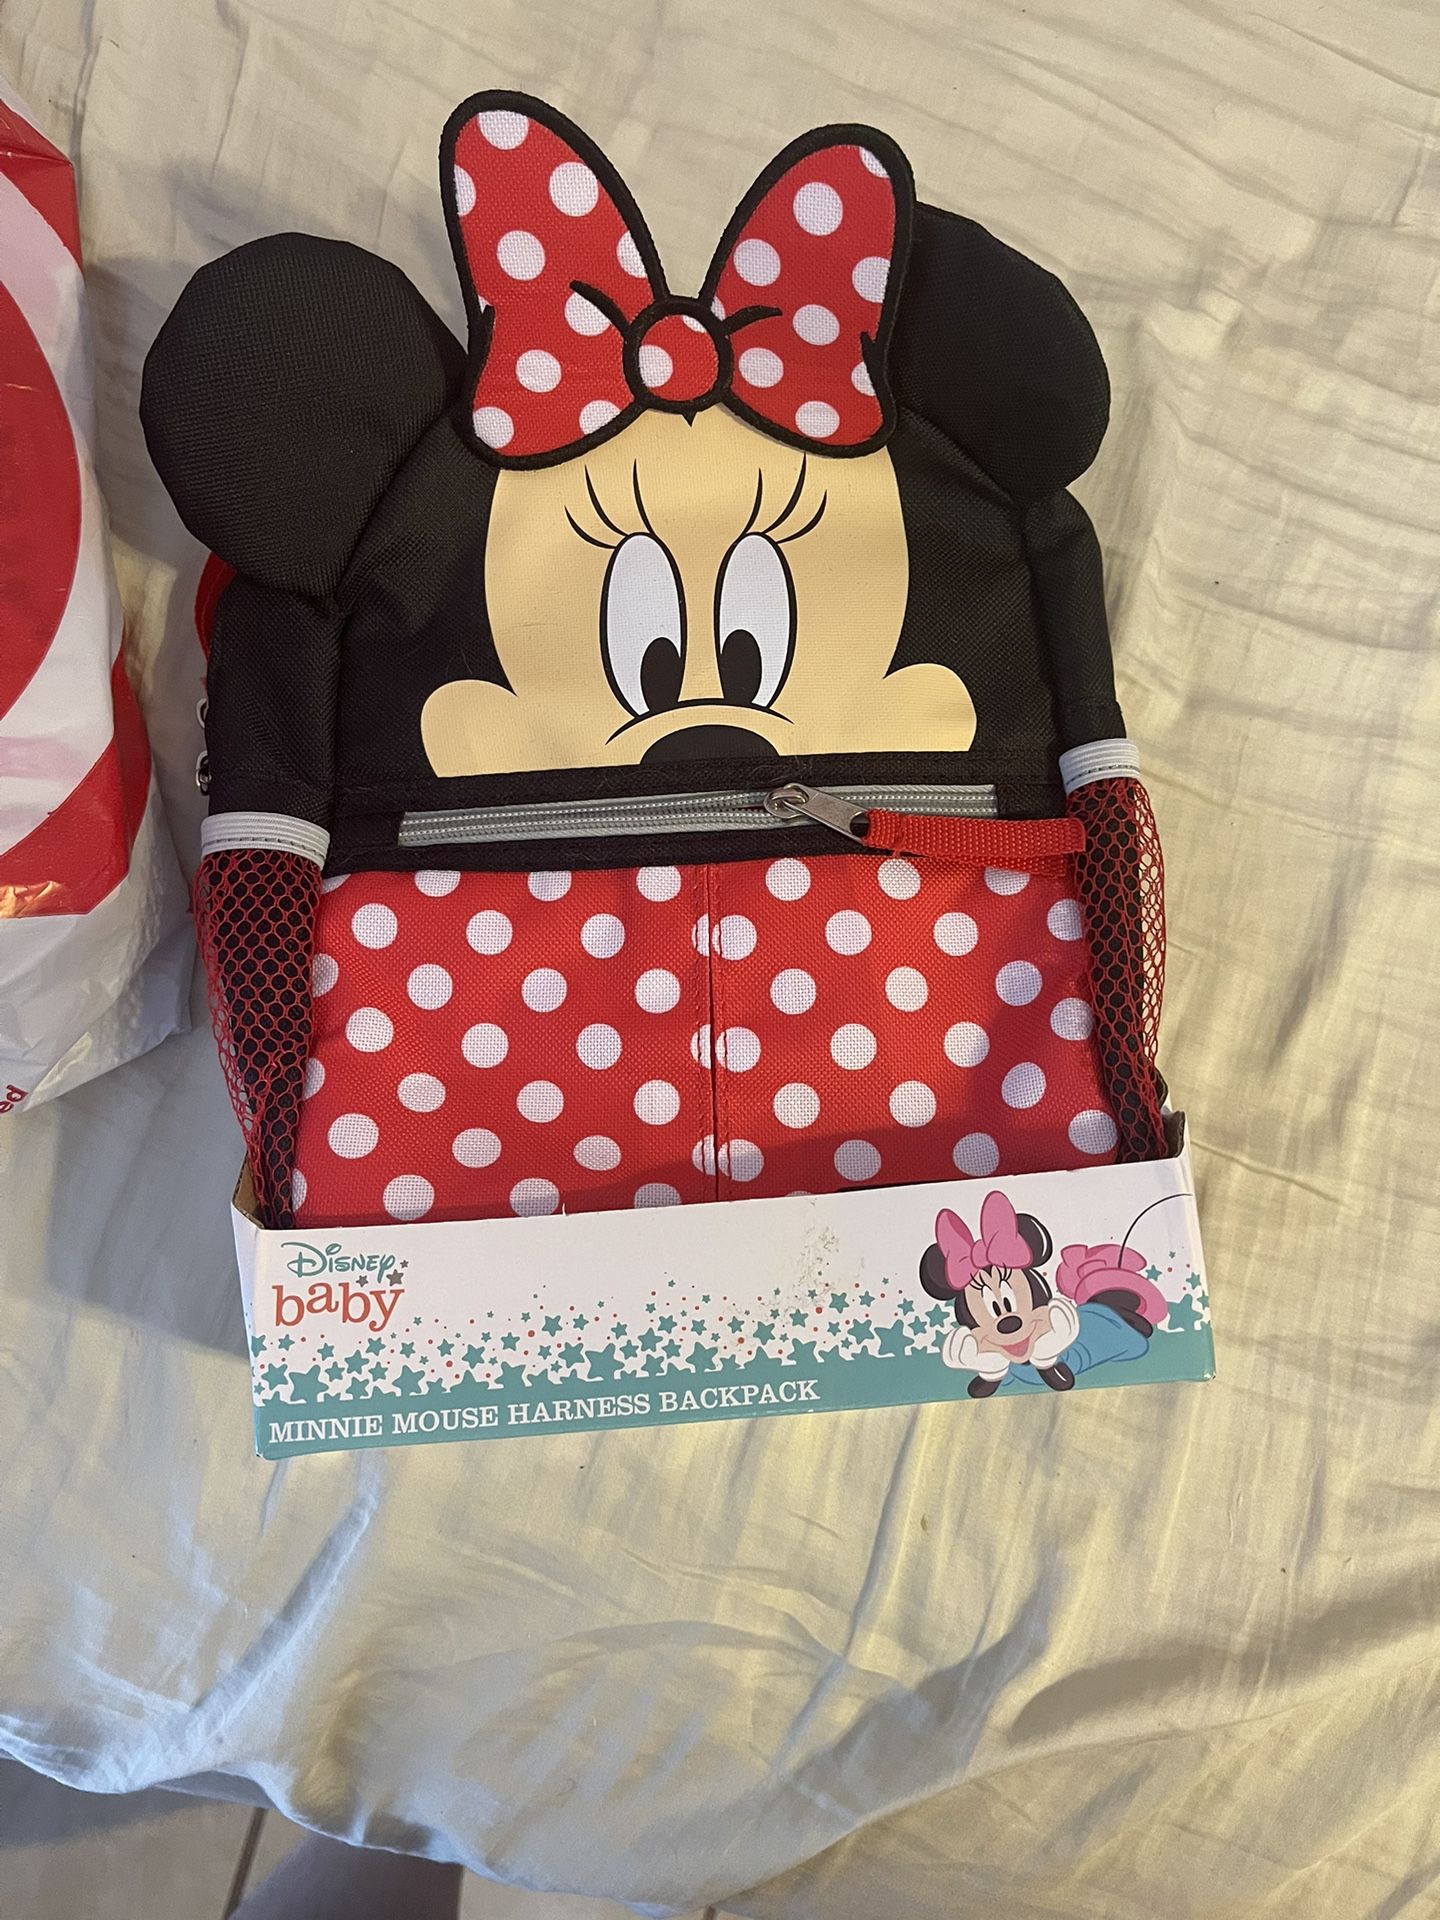 Minnie Mouse Harness Backpack